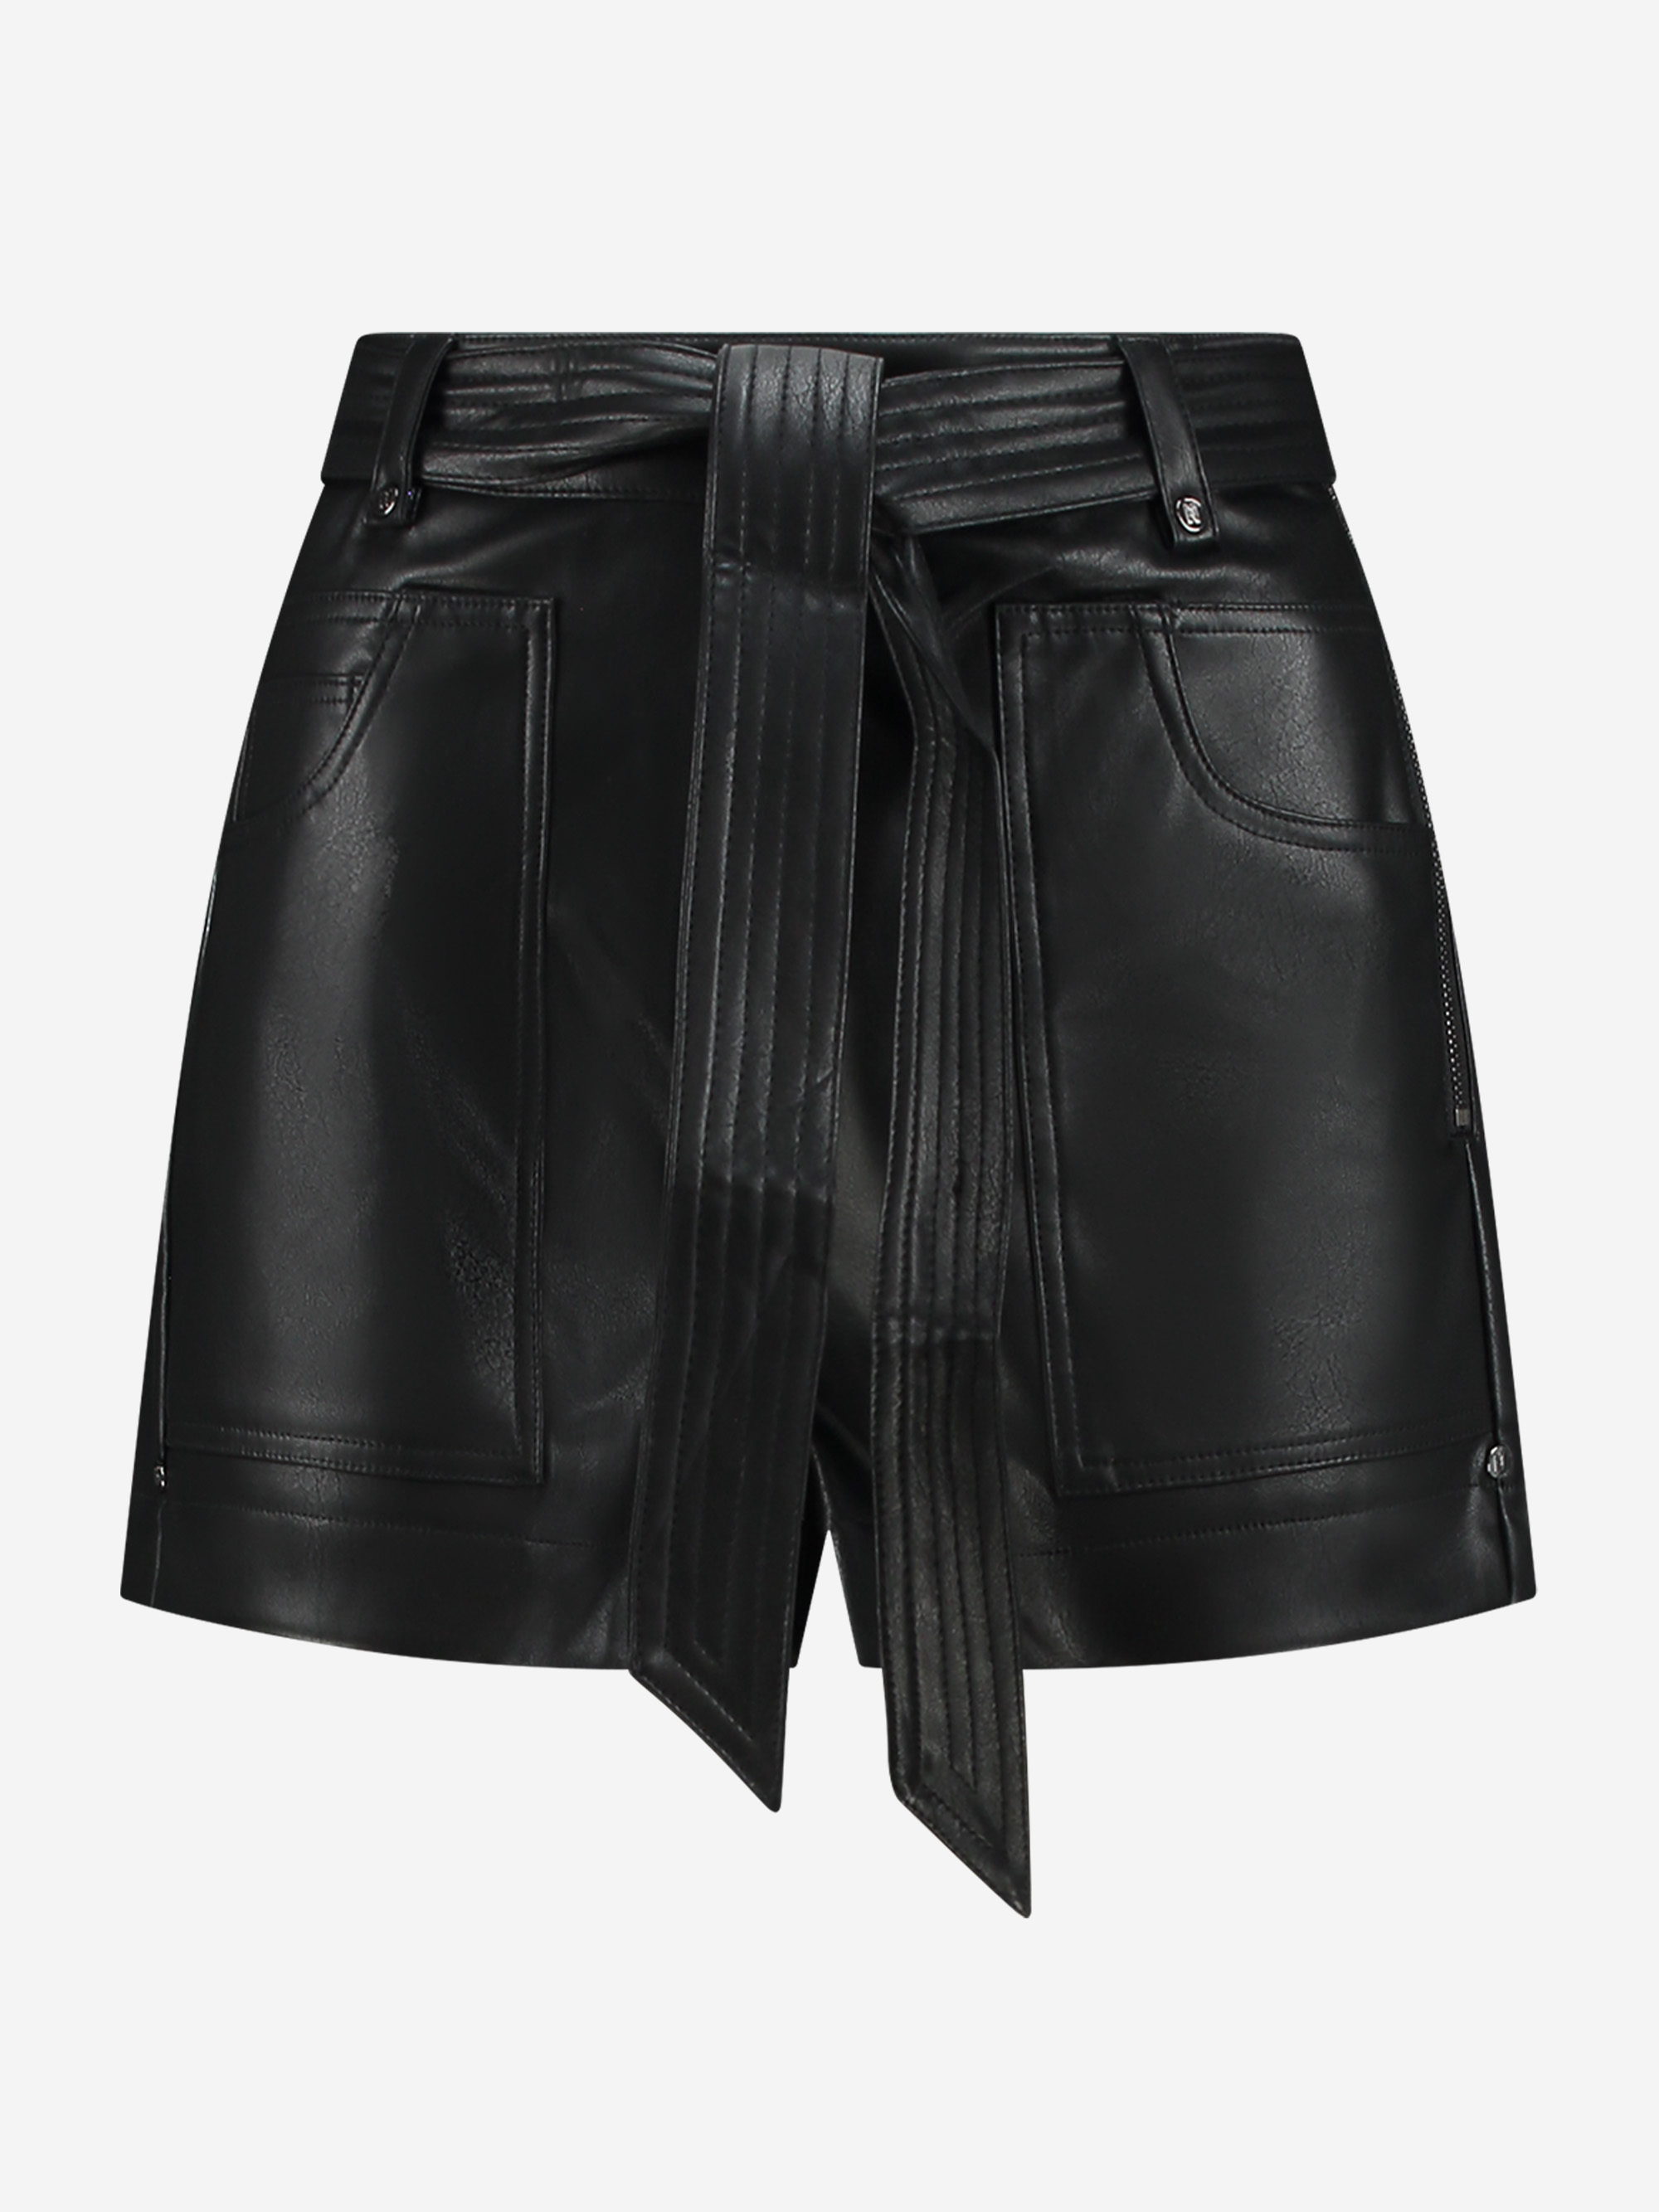 vegan leather shorts with tie belt